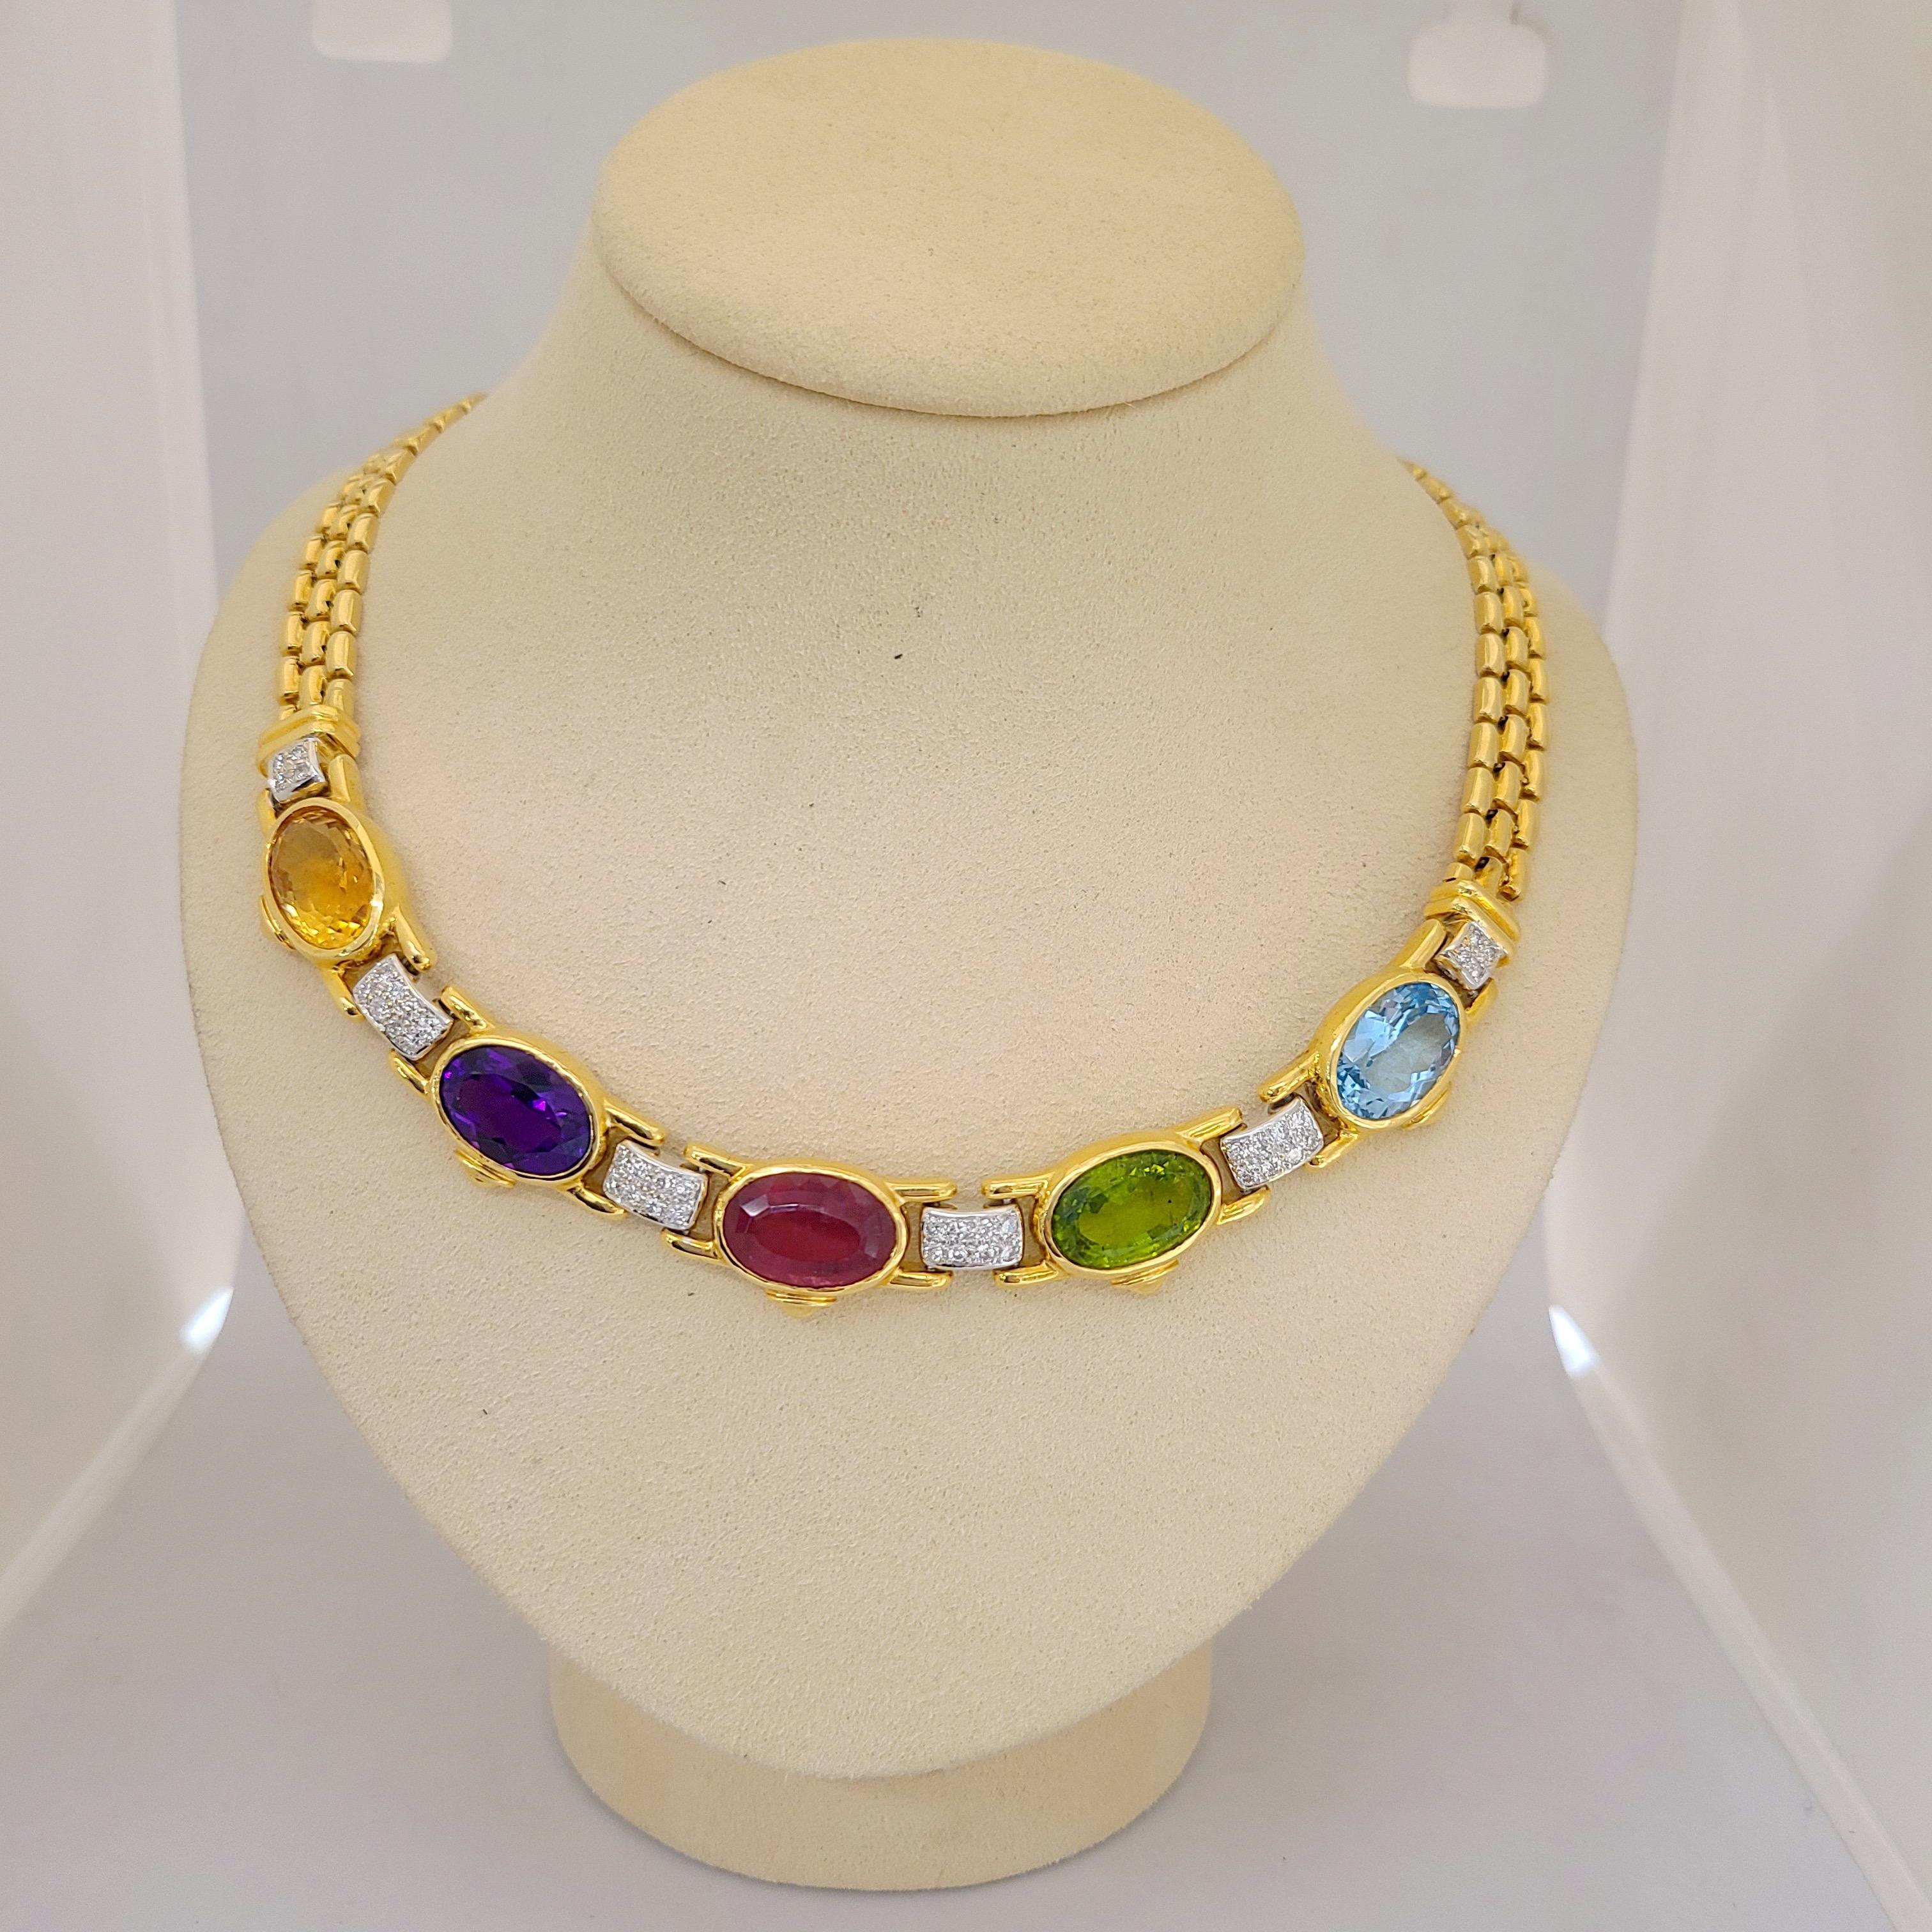 From Cellini Jewelers NYC comes this very classic and wearable necklace. The 18 karat yellow gold necklace is designed with 5 oval semi precious stones: citrine, amethyst, pink tourmaline ,peridot and blue topaz. White gold diamond set links connect